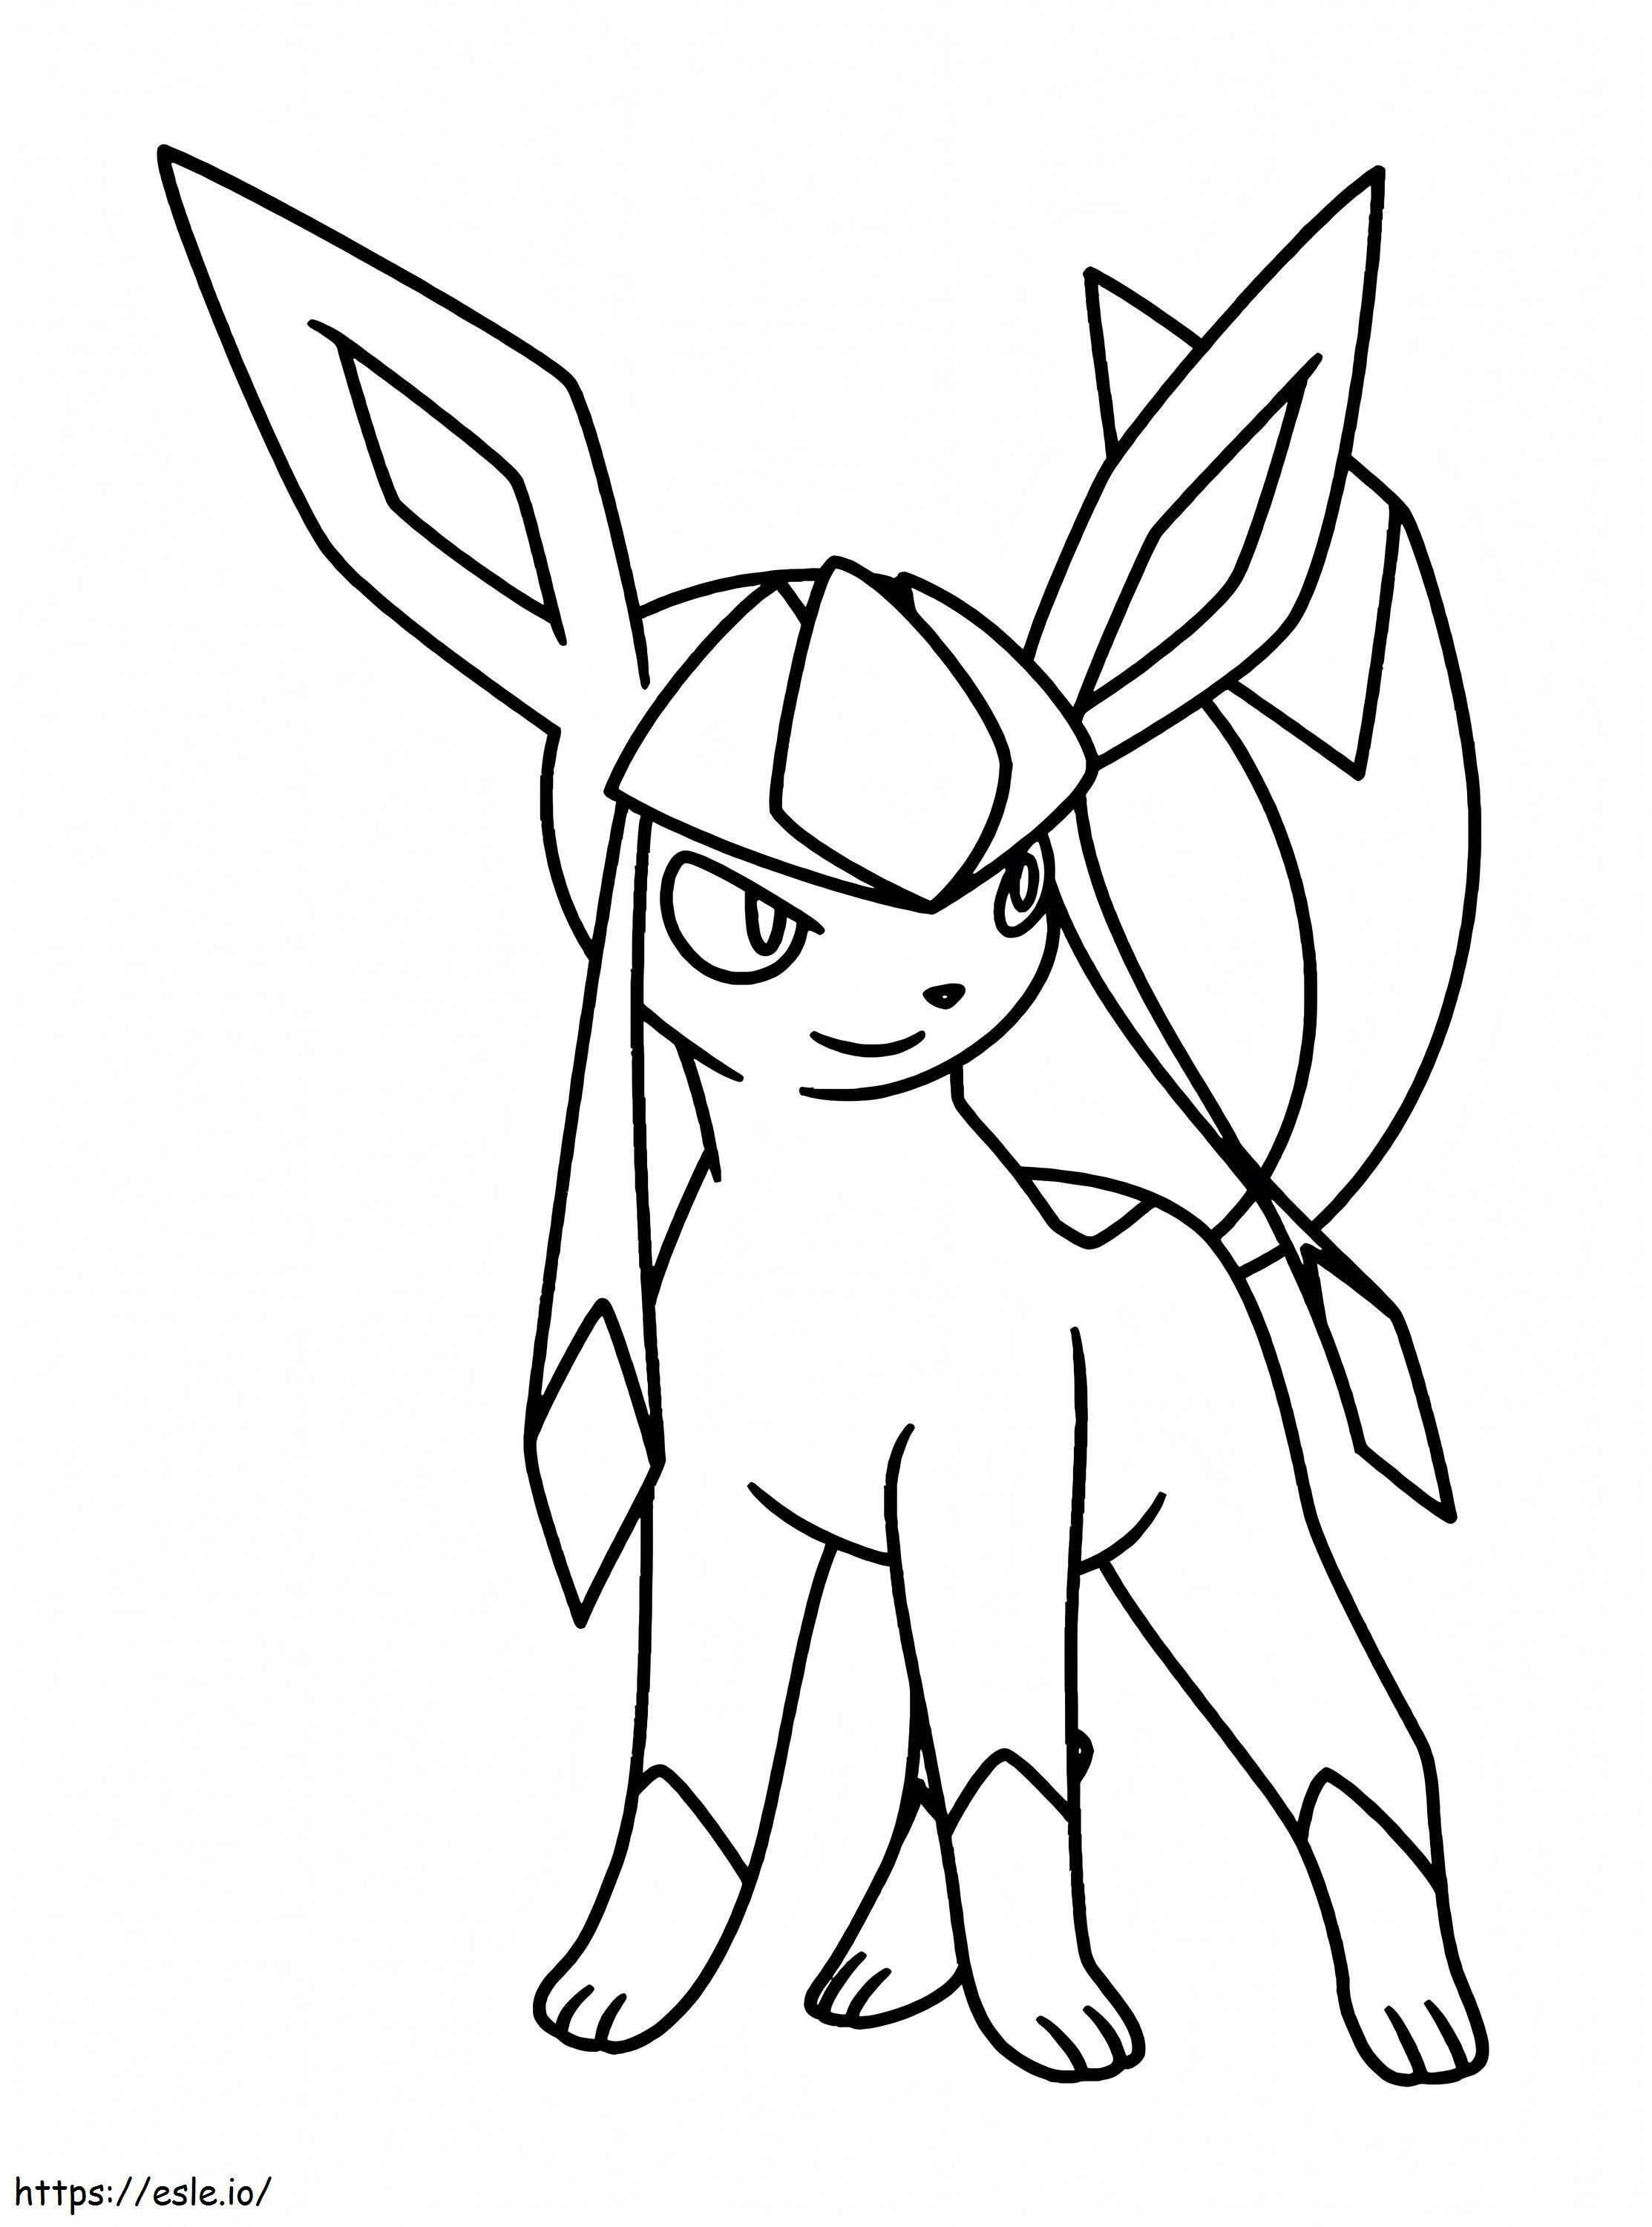 Glaceon 4 coloring page